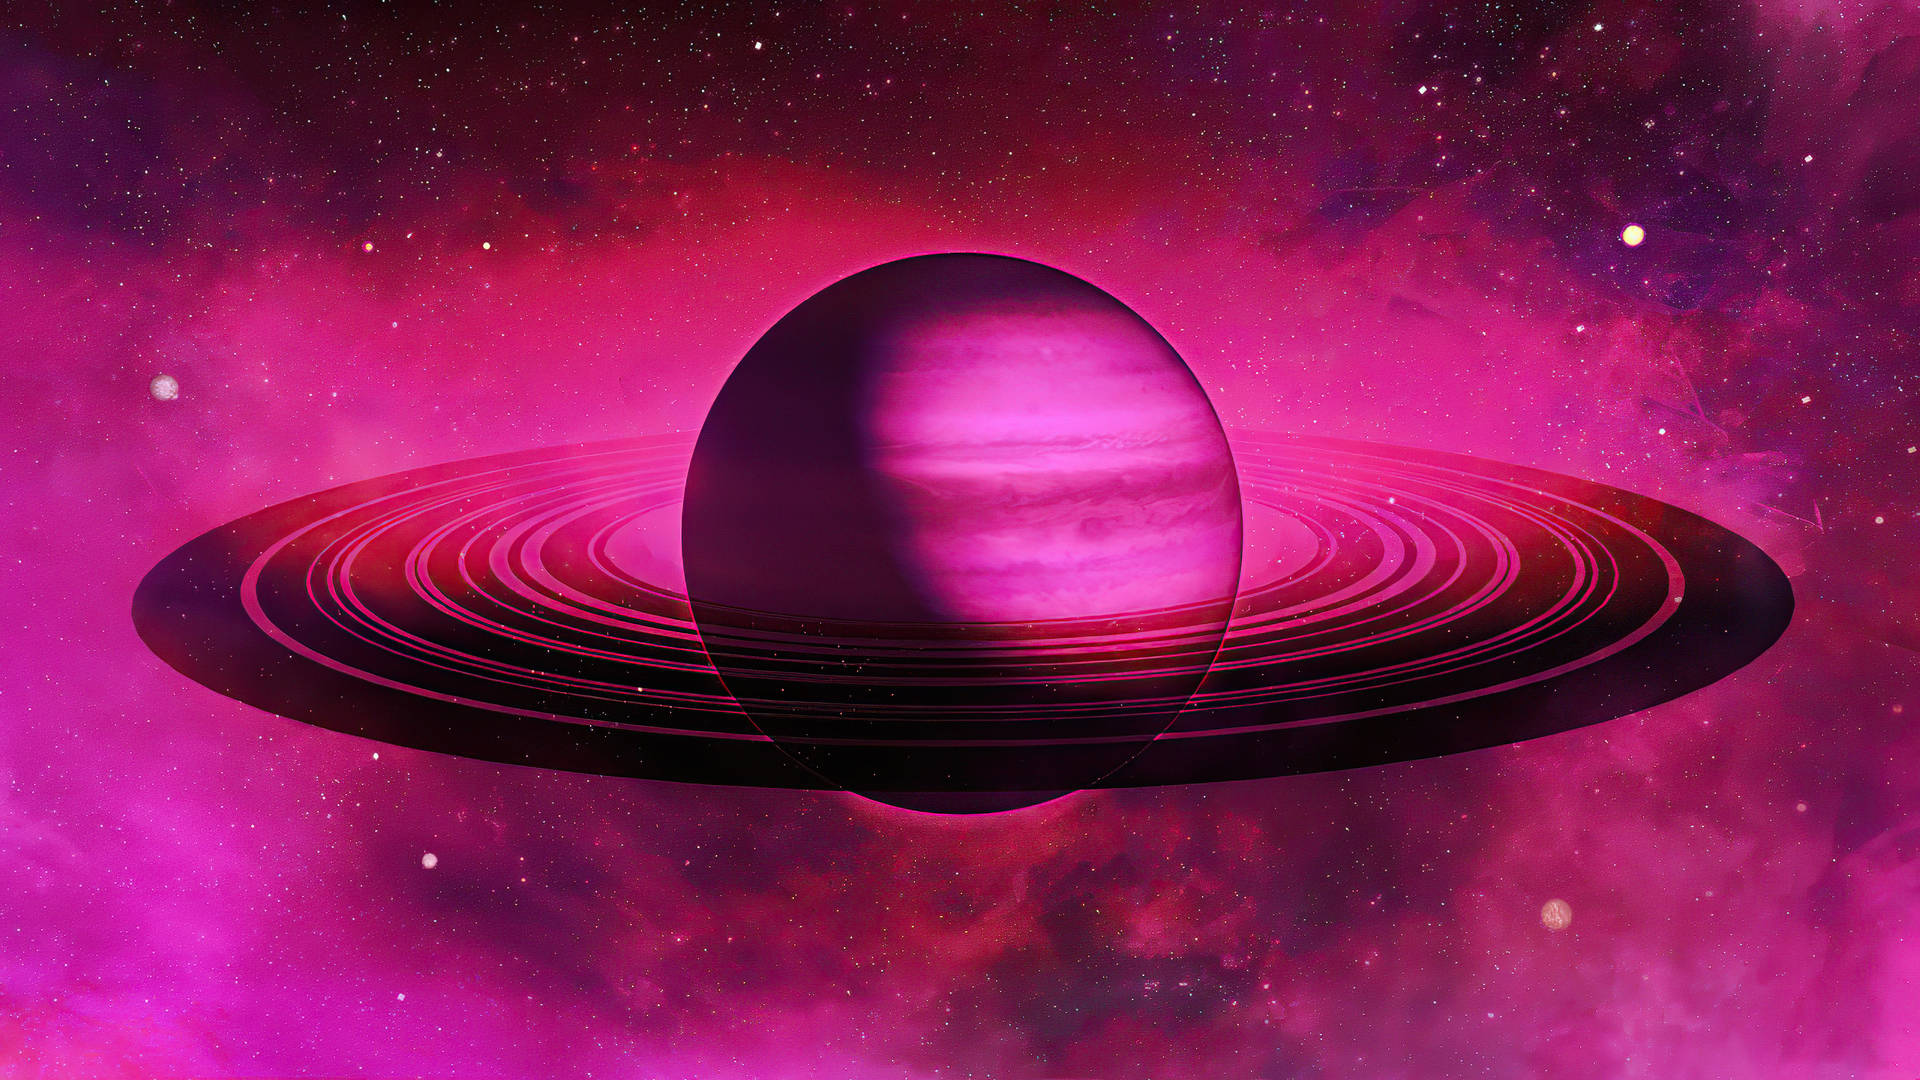 1920x1080 Hd Giant Pink Planet Background